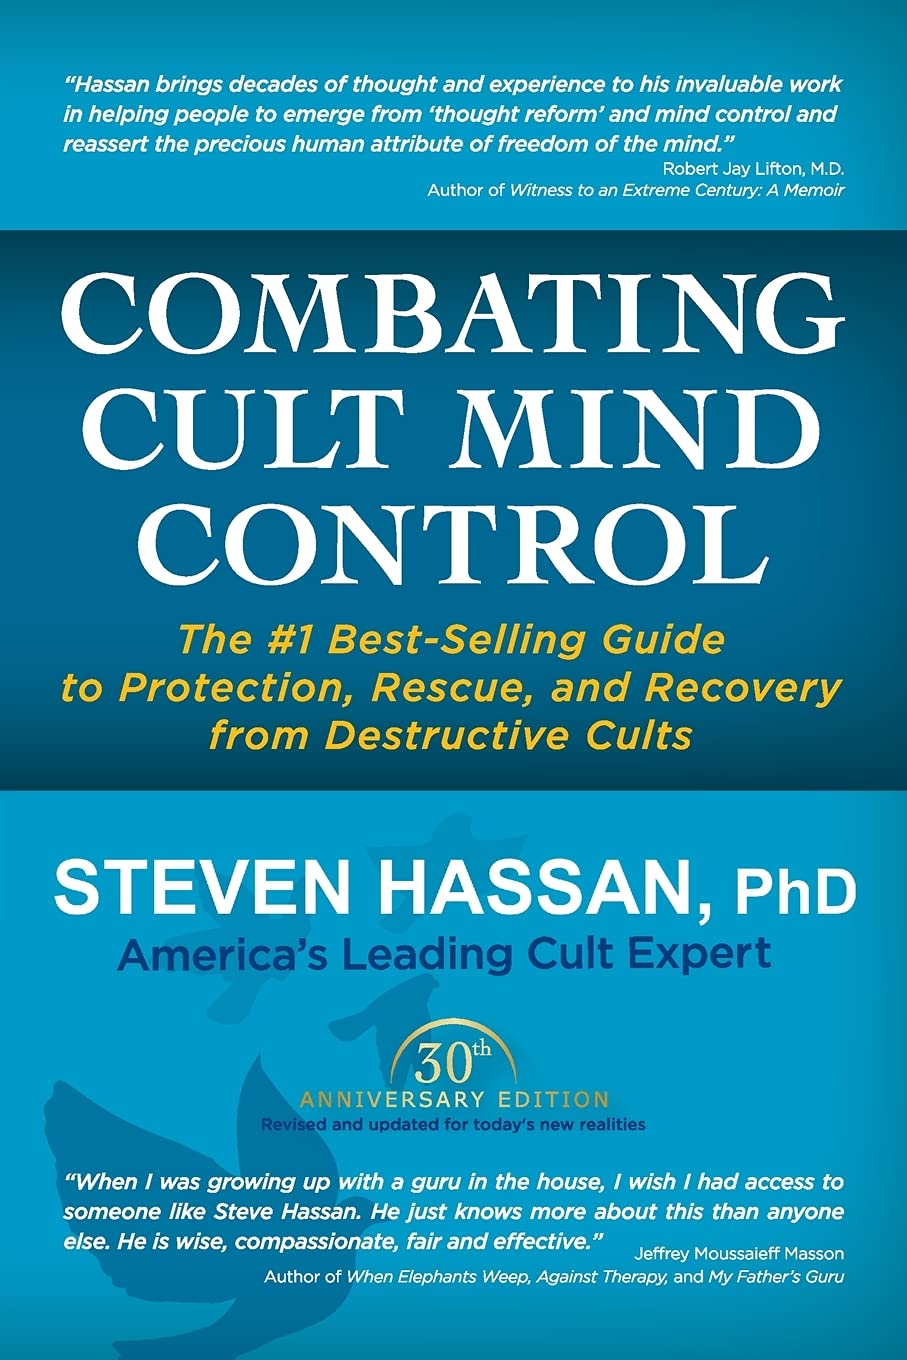 books by Dr. Steven Hassan - Combating Cult Mind Control